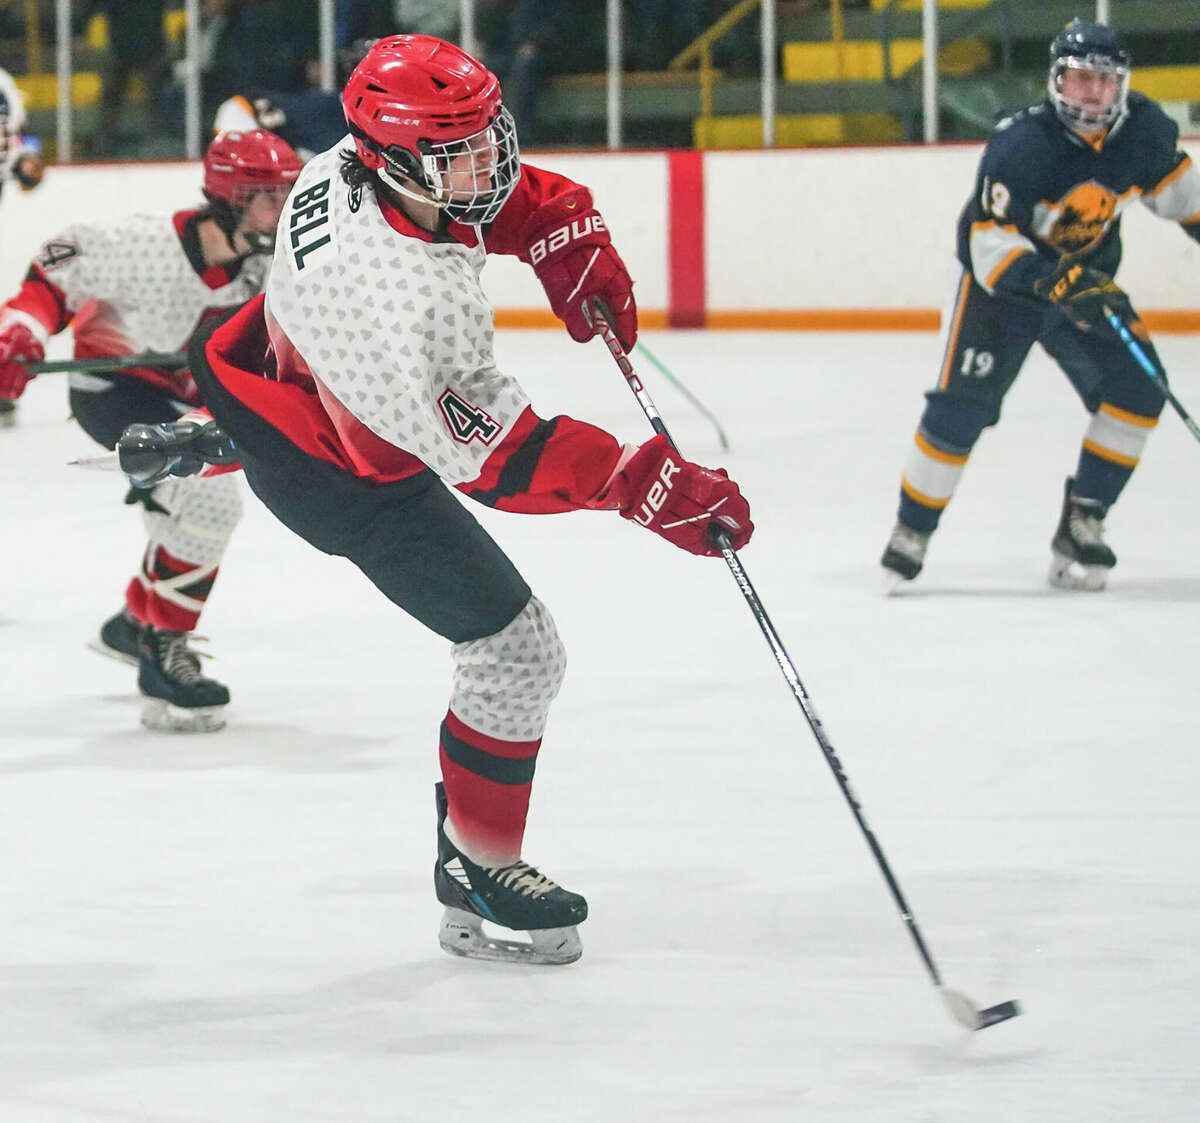 Alton's Lawson Bell scored a pair of goals, including one in regulation and one in an overtime shootout, in the Redbirds' 2-1 win over Highland in Game 1 of the MVCHA Class 1A finals.